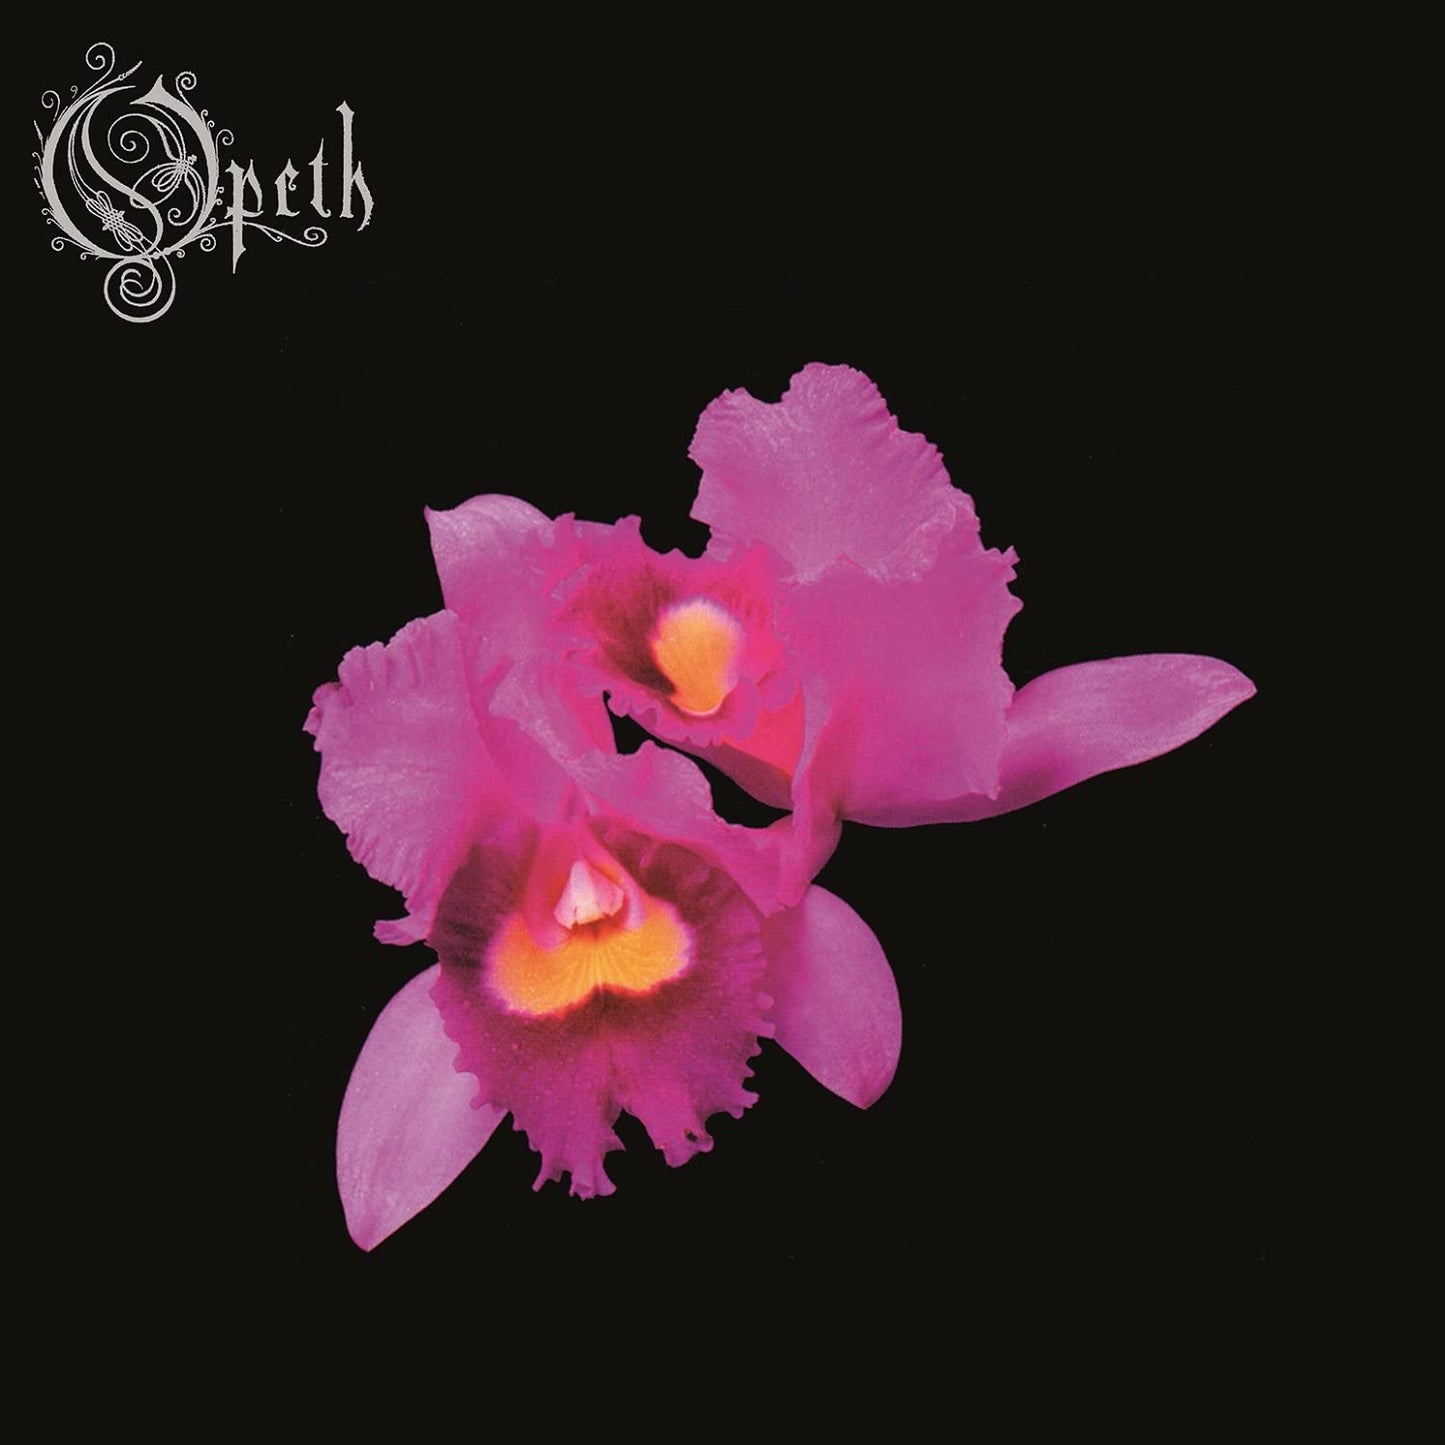 Opeth - Orchid - CD